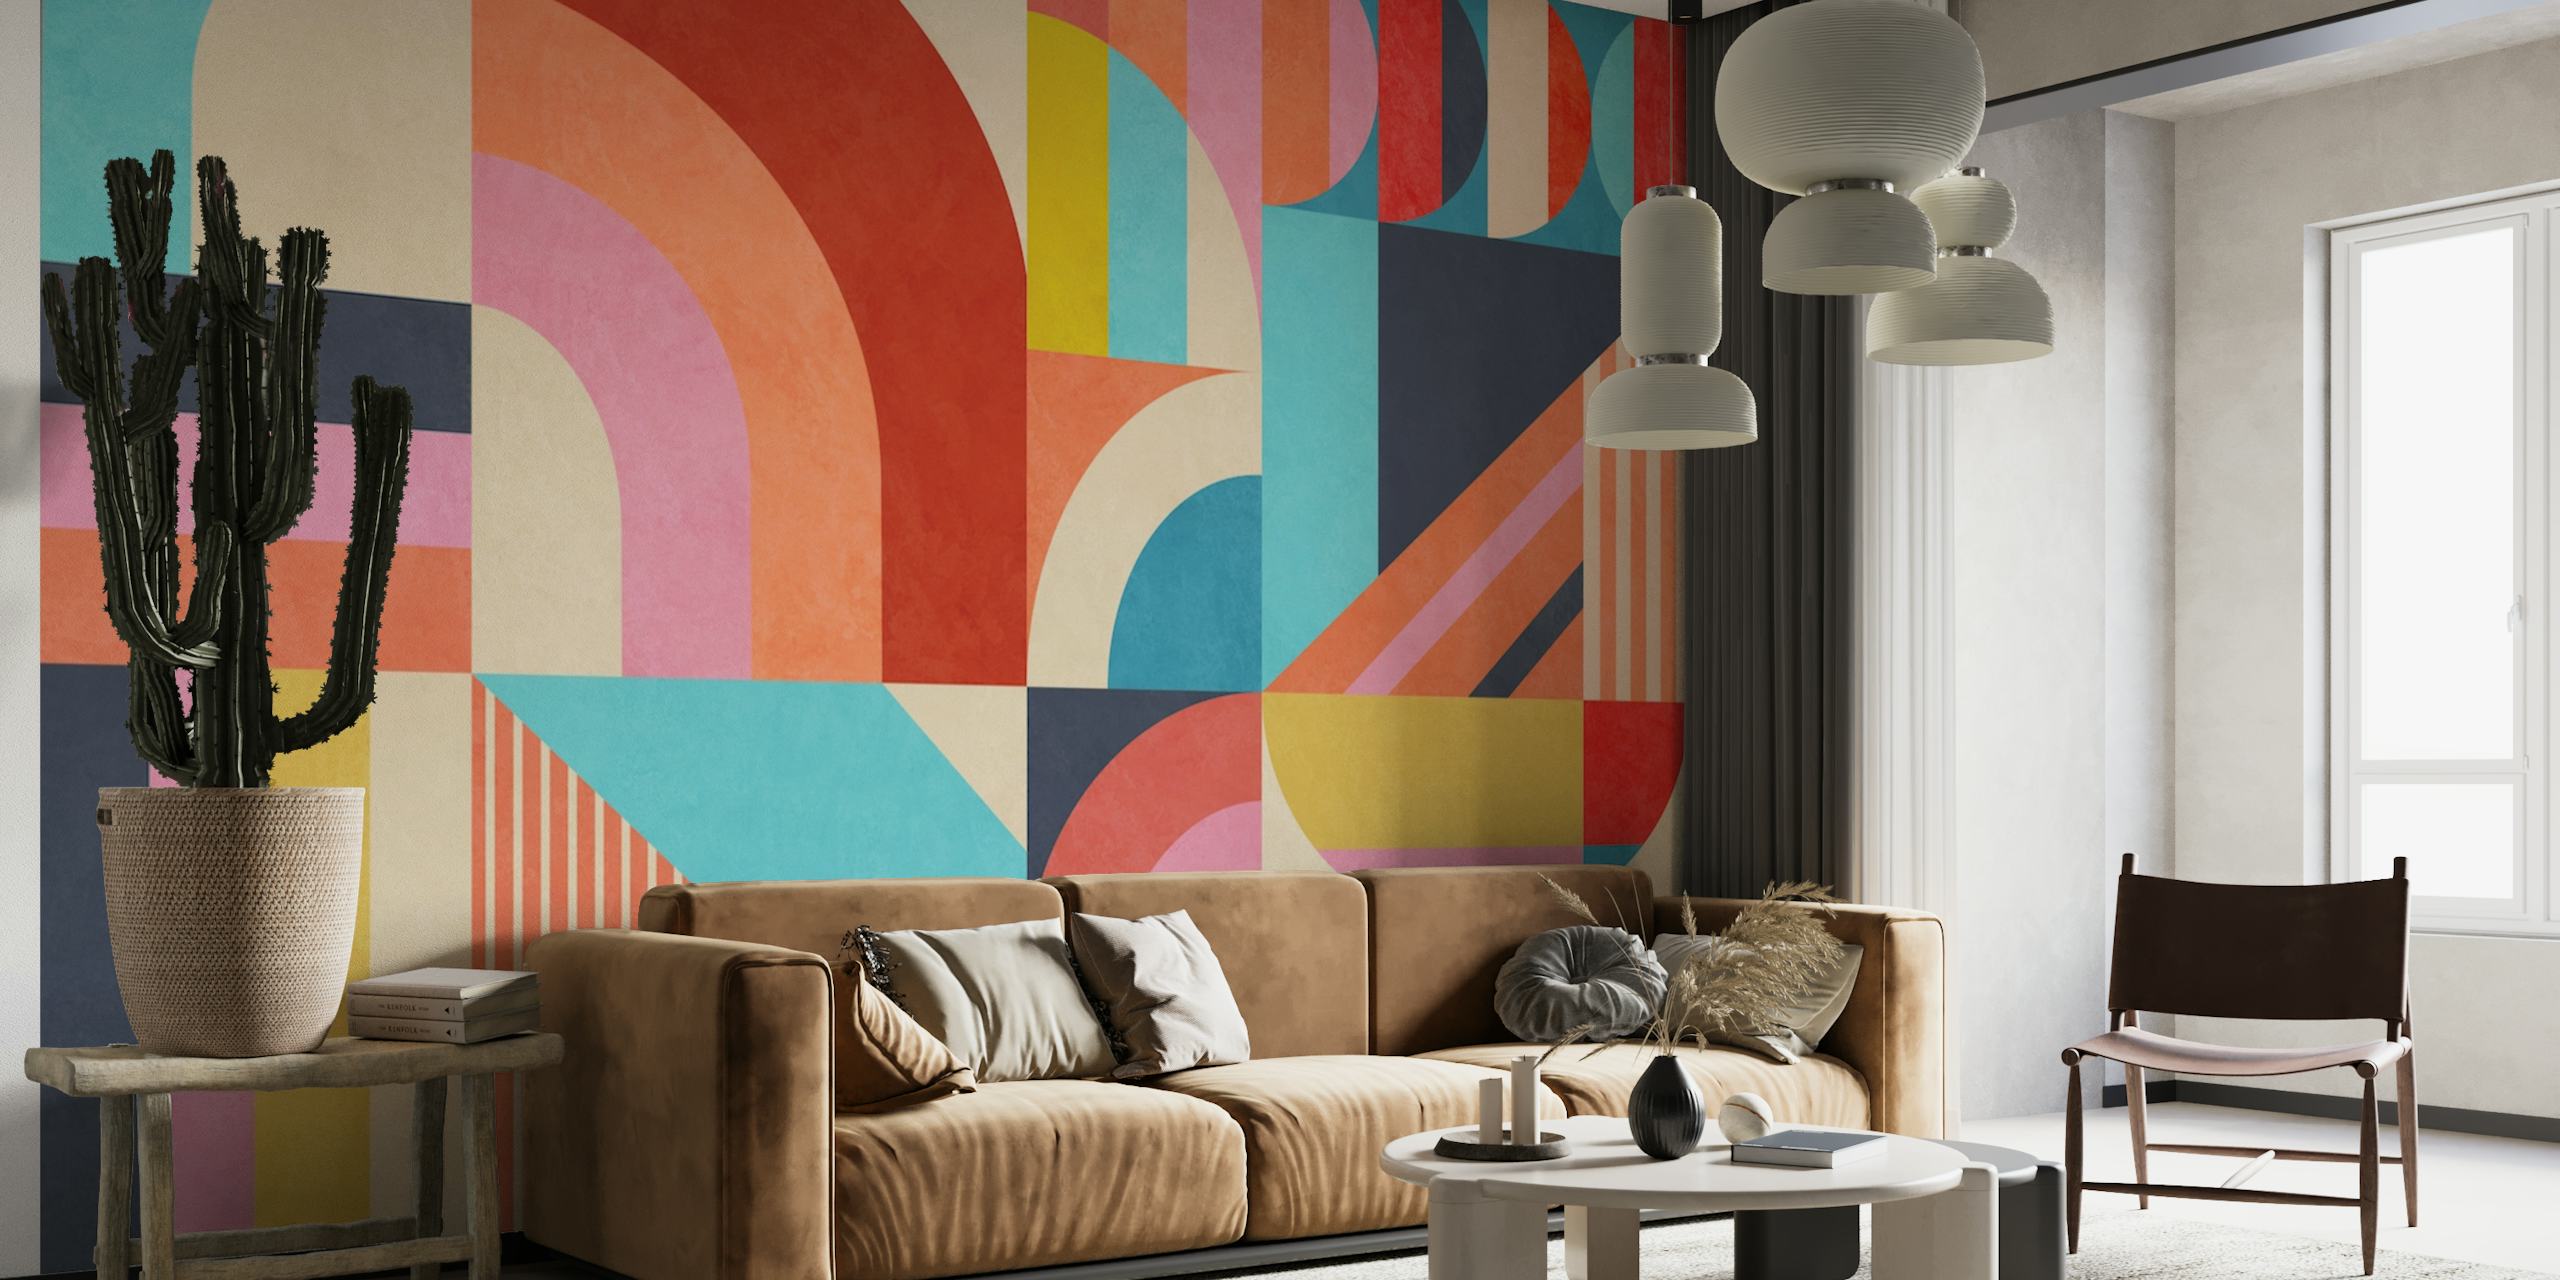 Abstract geometric wall mural with a mix of warm and cool tones